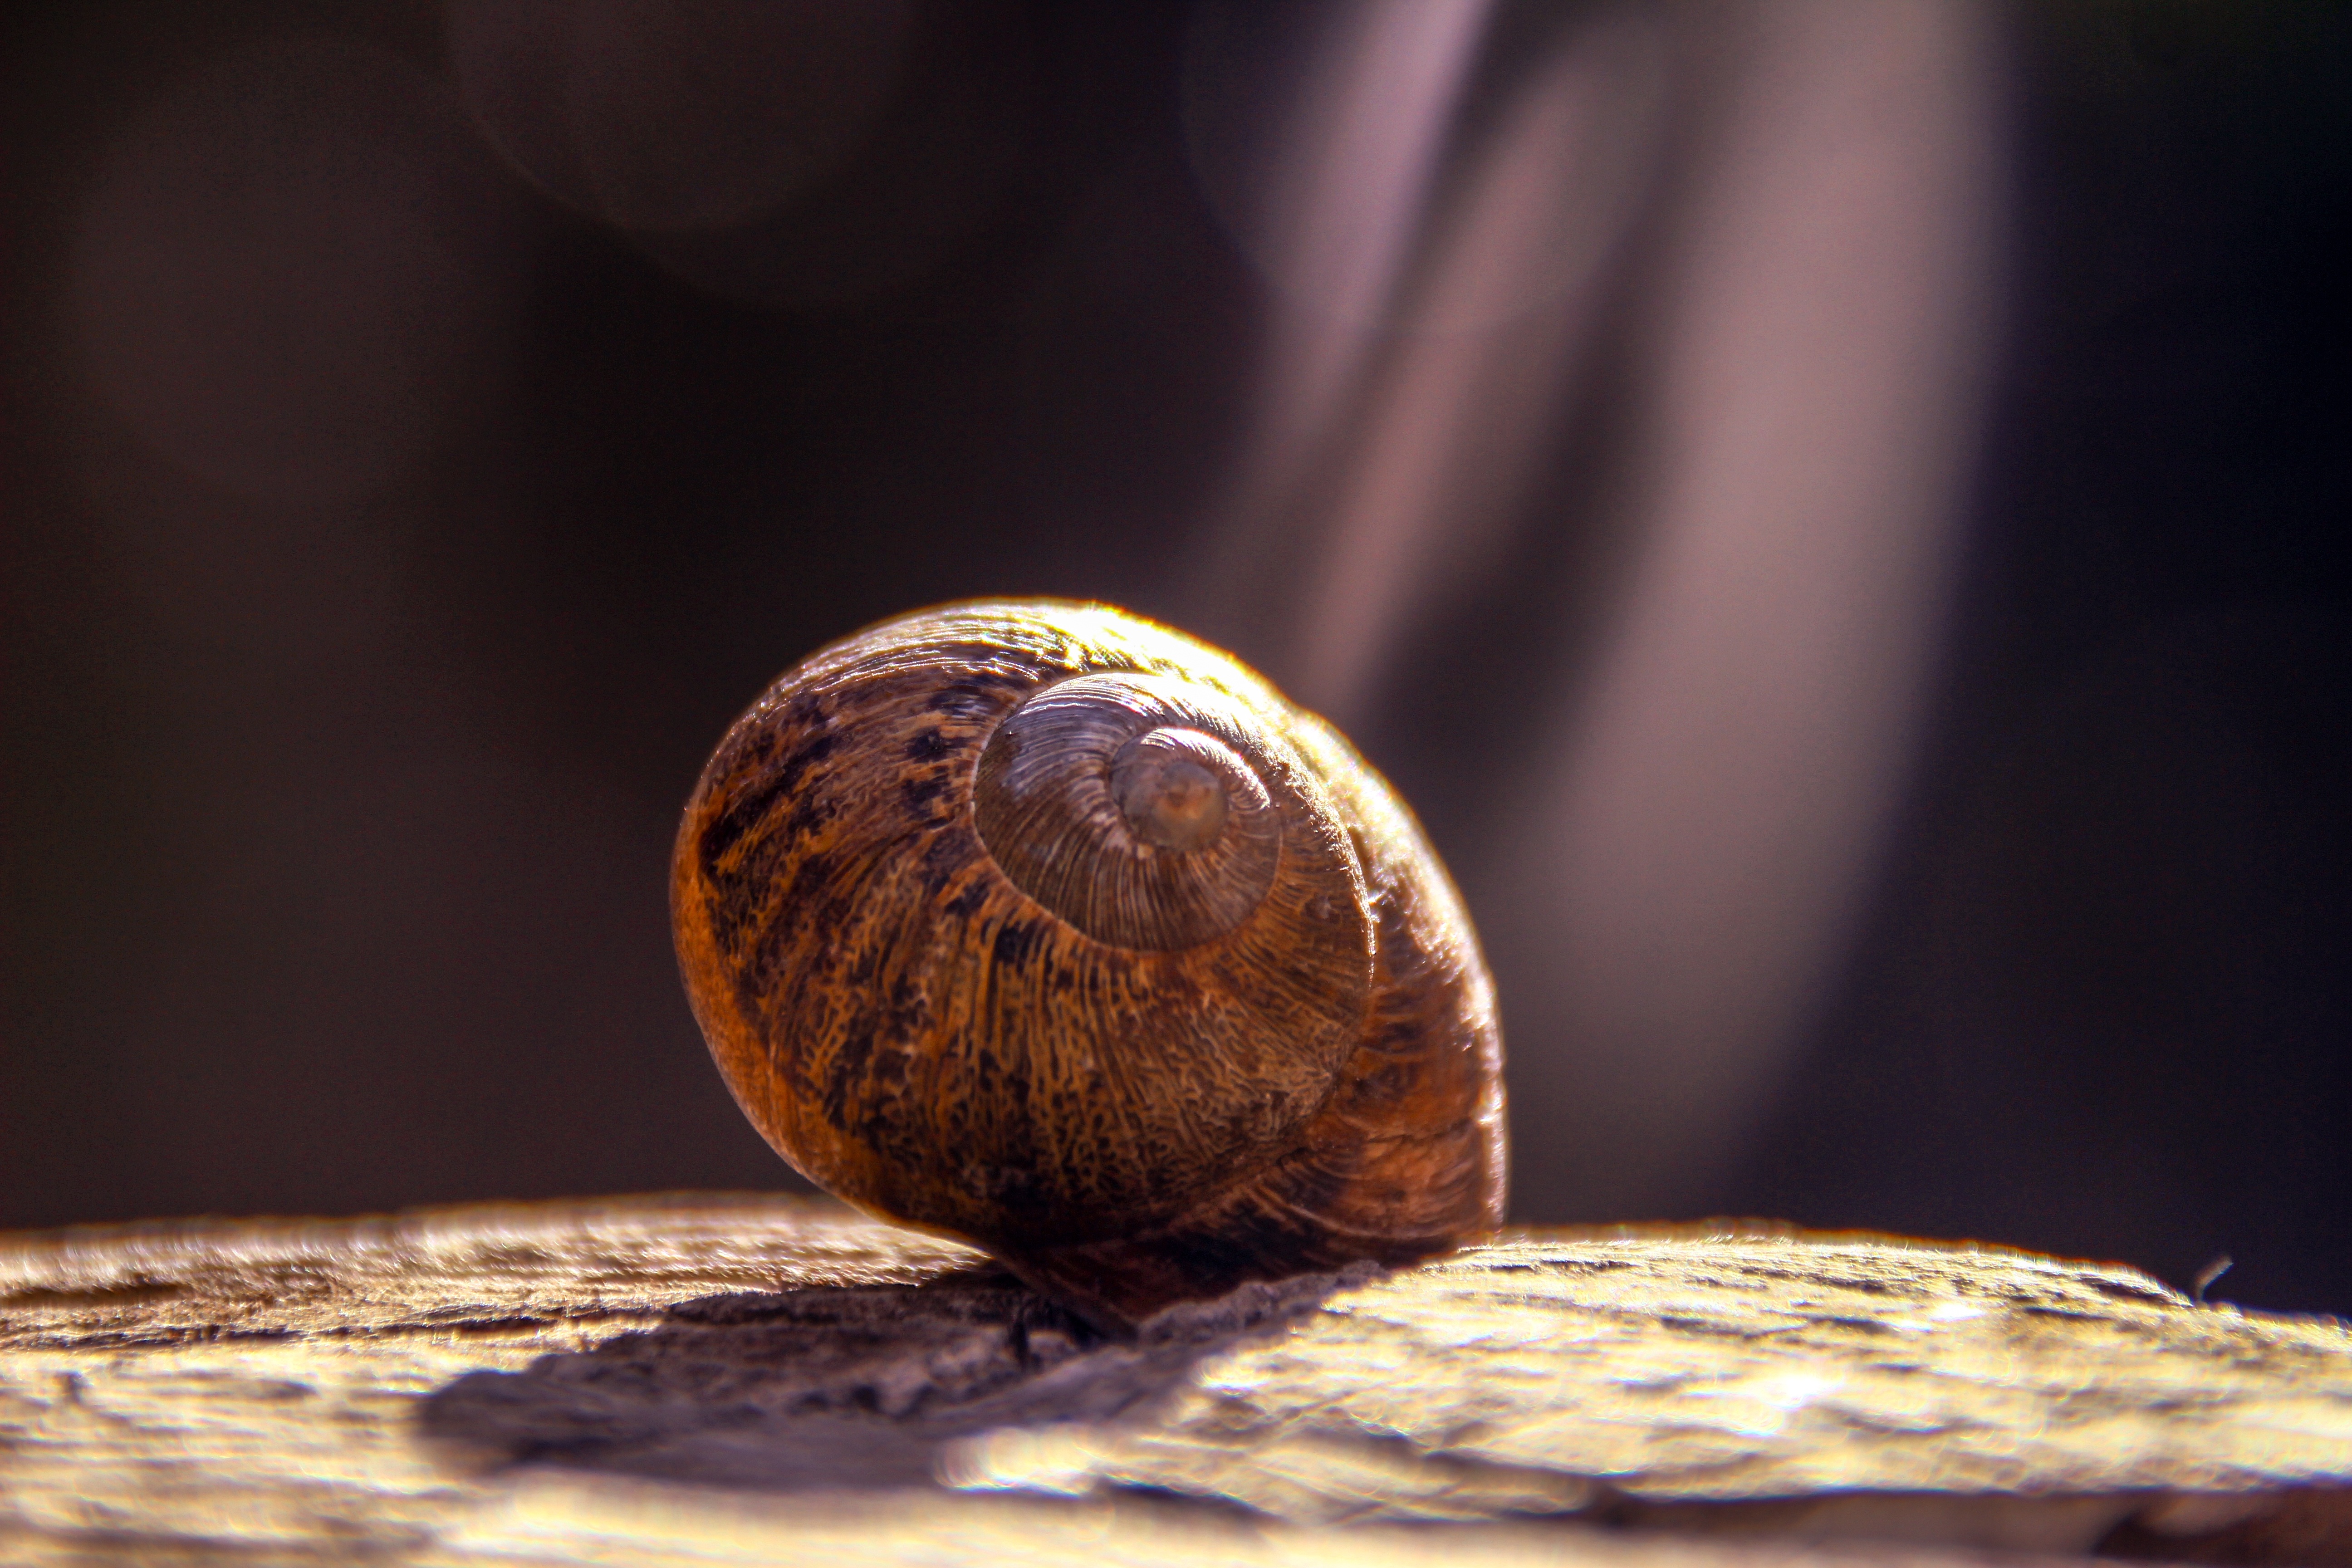 animals, close up, snail, carapace, shell